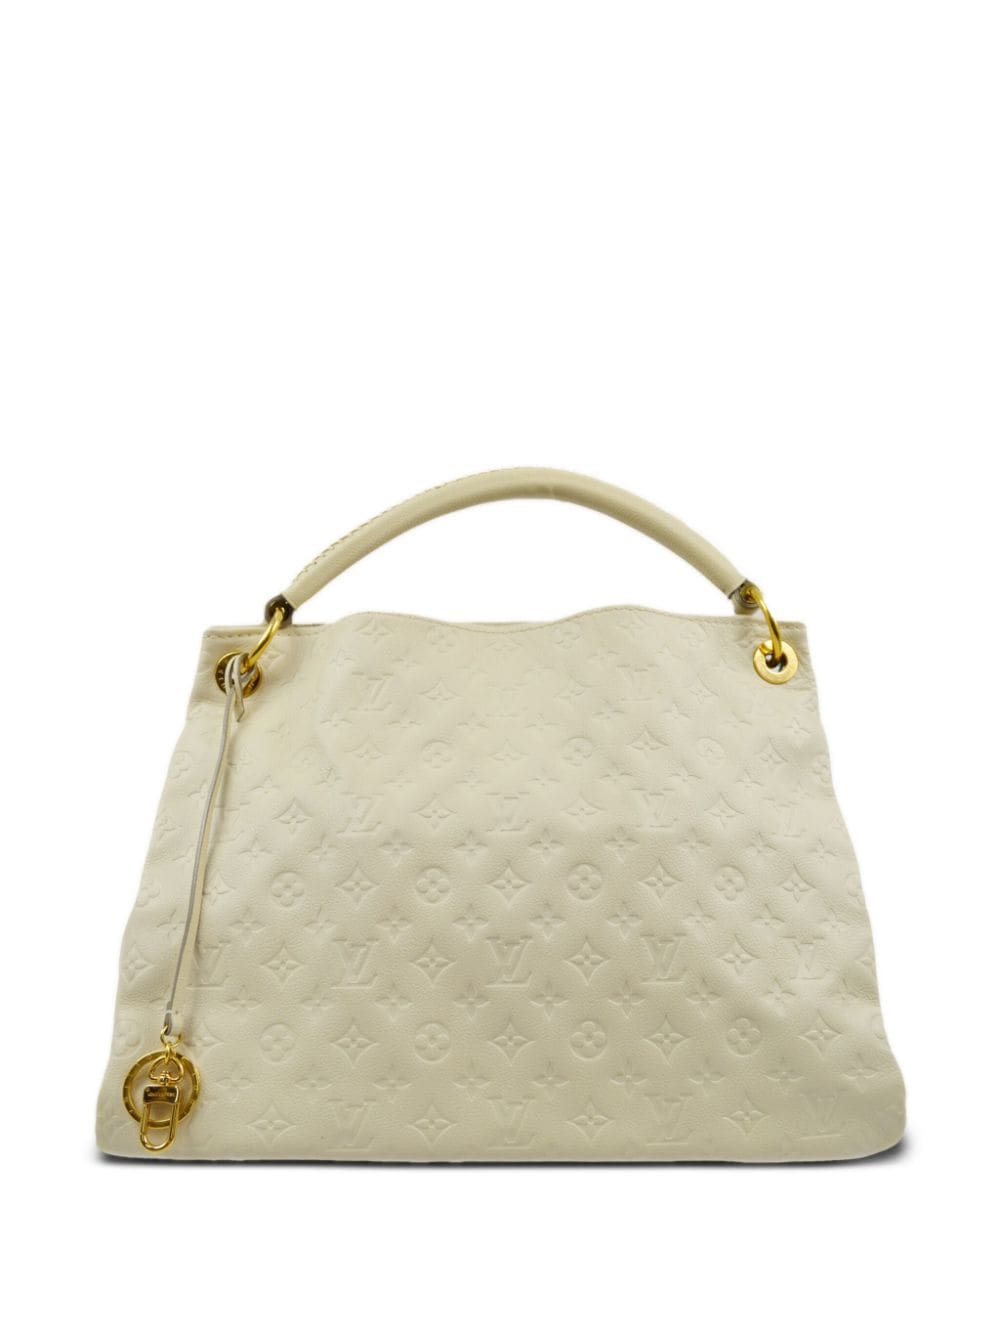 Pre-owned Louis Vuitton 2011 Artsy Mm Tote Bag In Neutrals